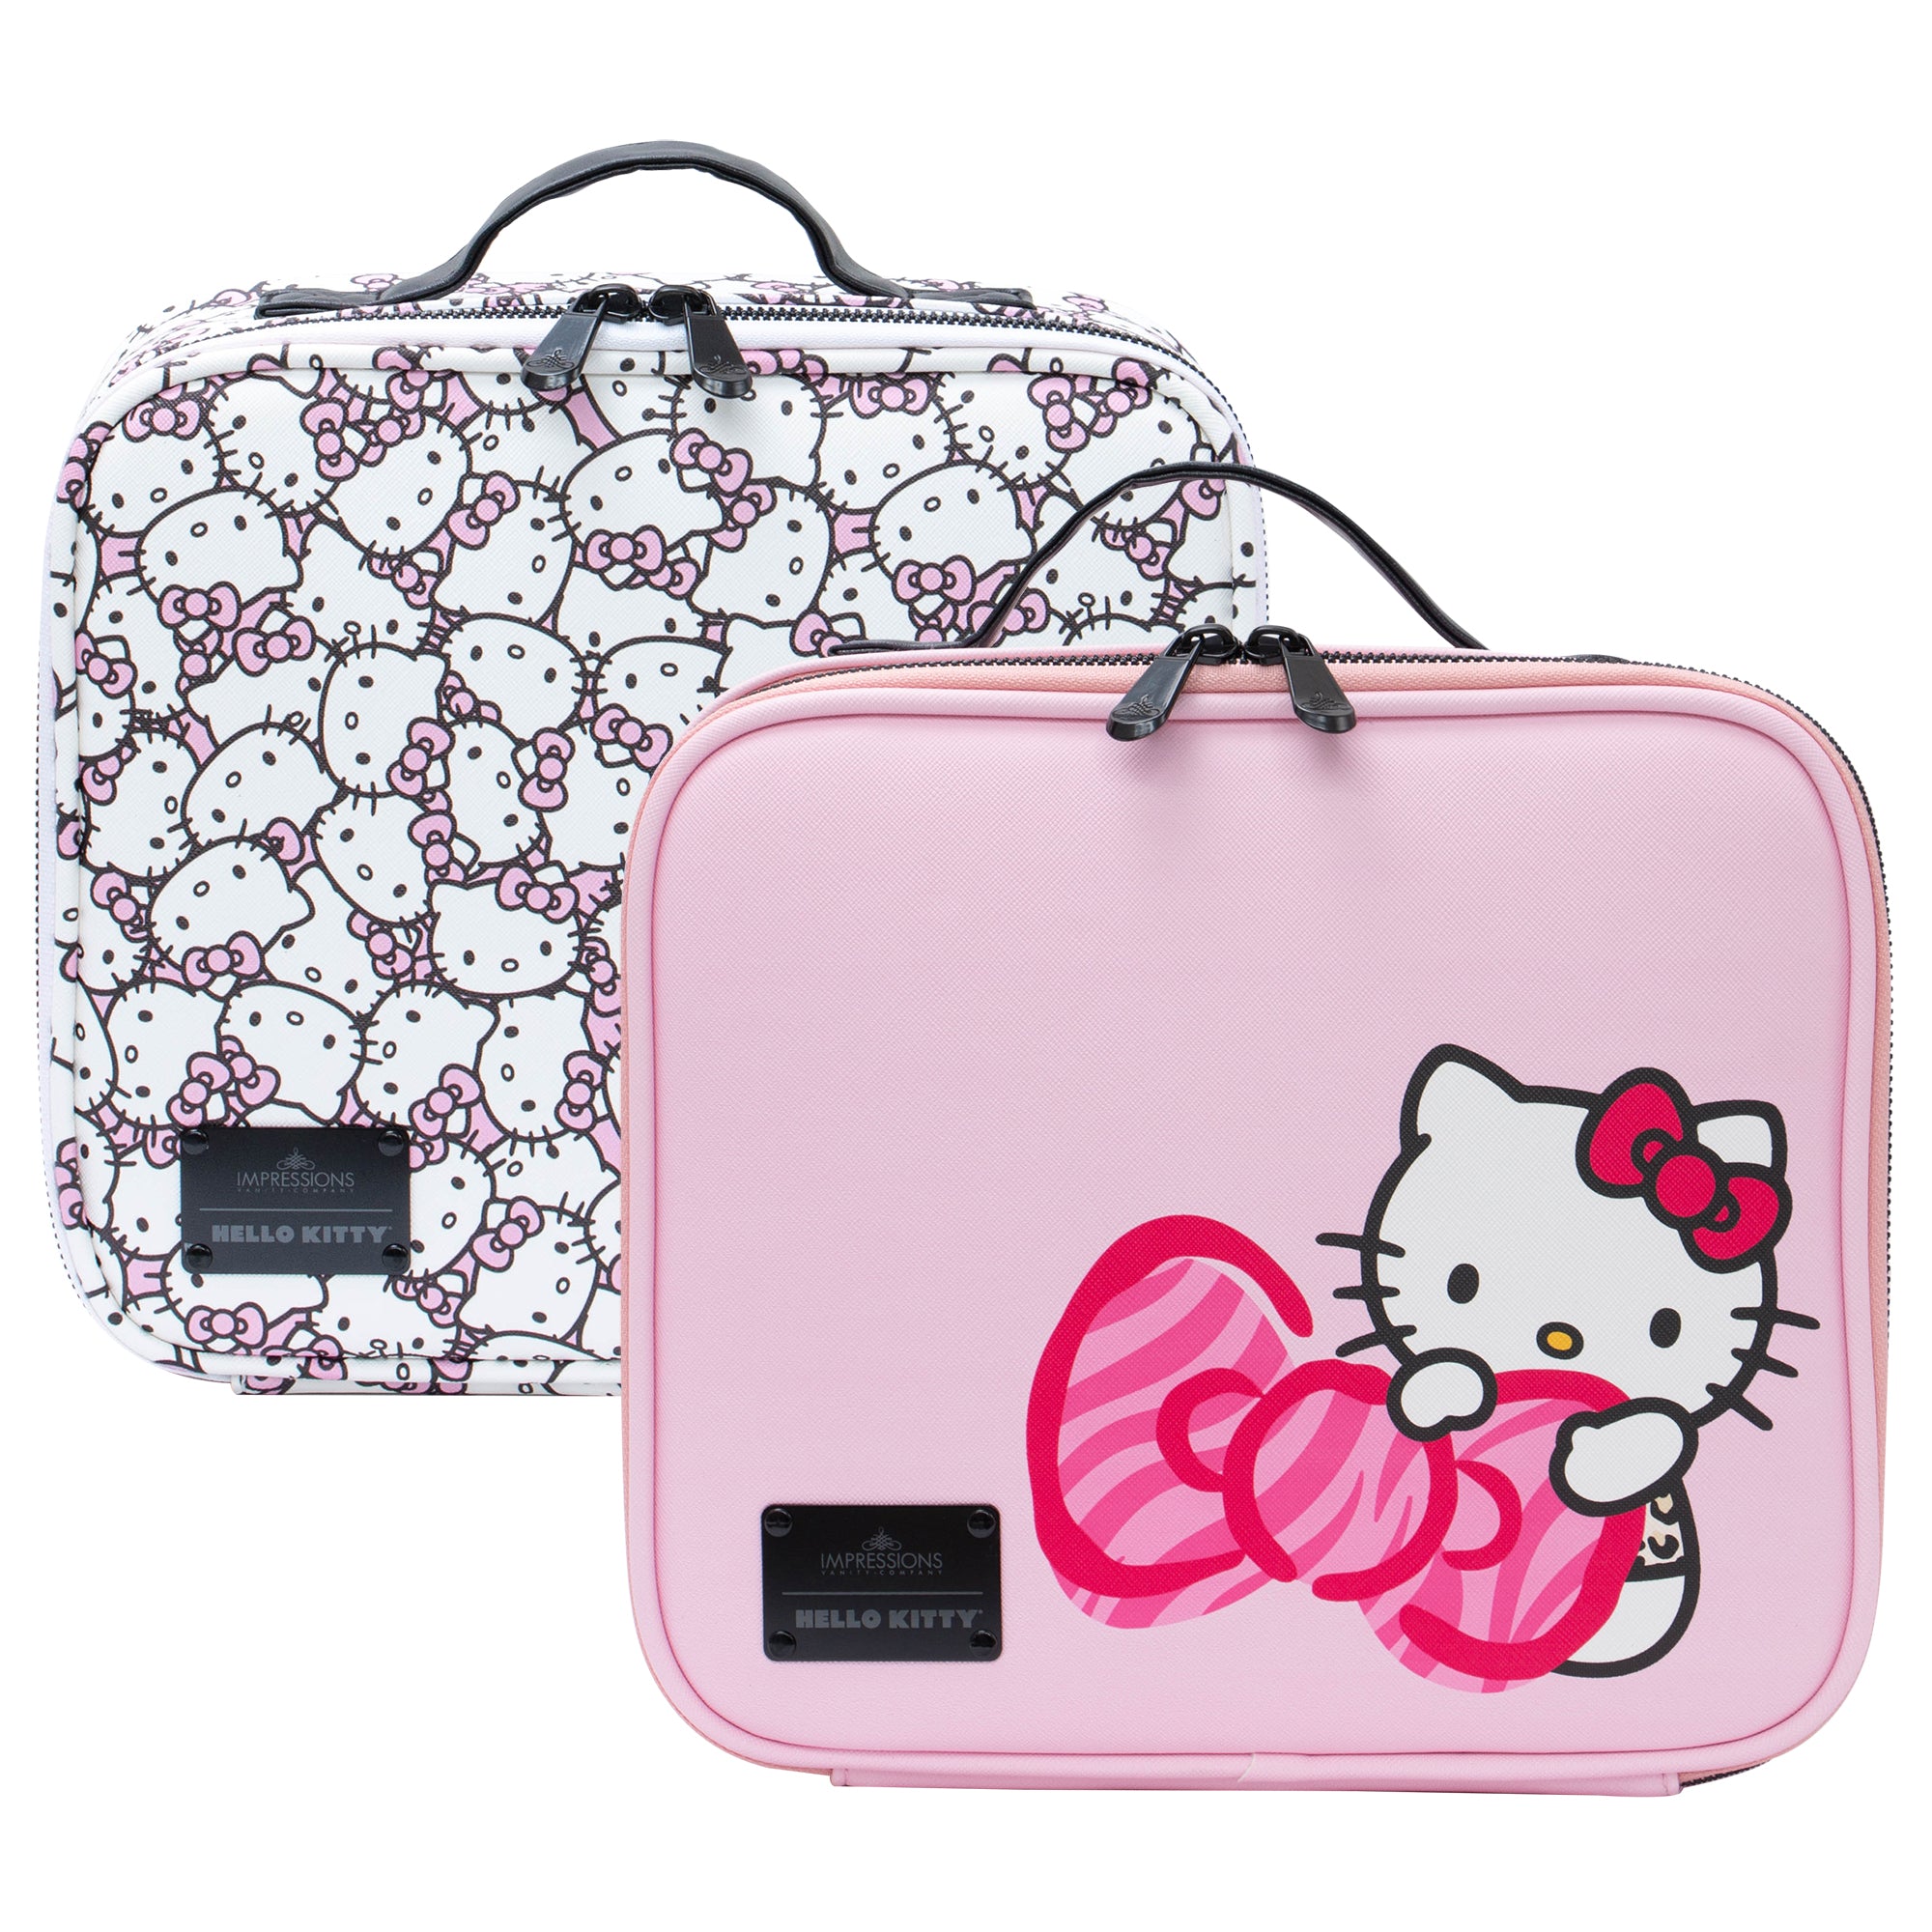 Impressions Vanity Hello Kitty Cosmetic Bag with Faux Leather, Travel Toiletry Bag with Inside Zipper Pockets, Waterproof Reusable Large Cosmetic